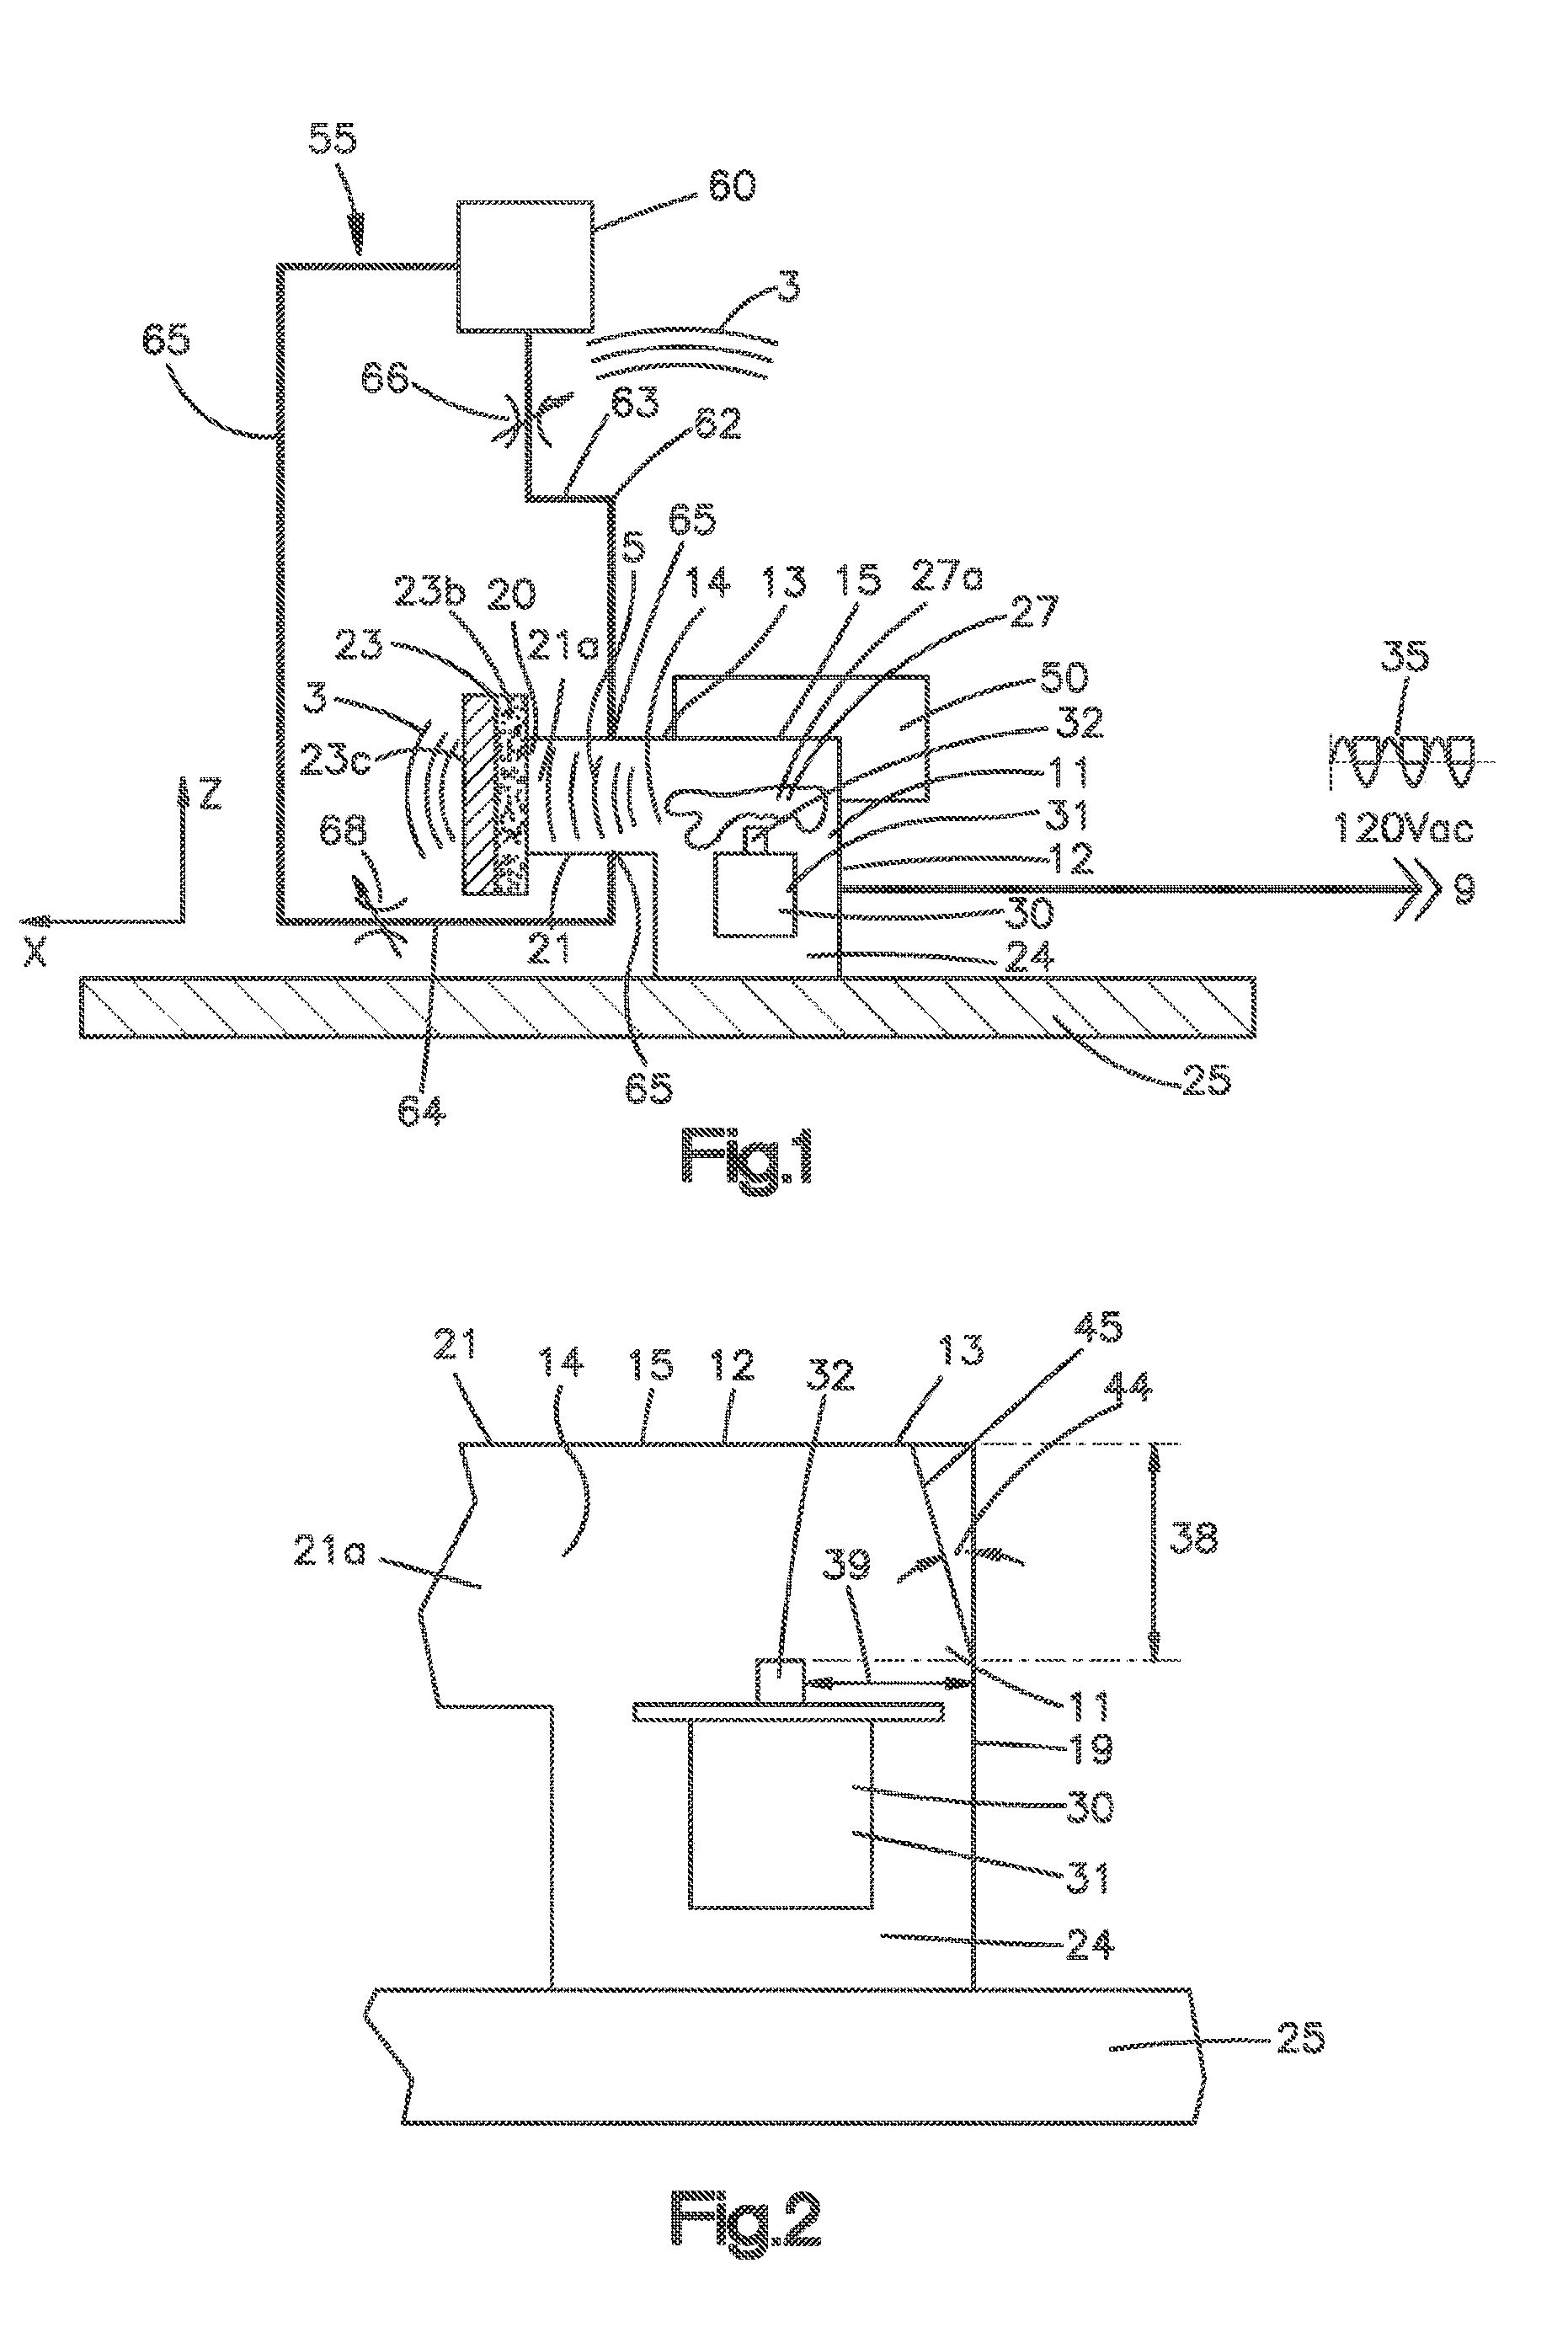 System for generating electromagnetic waveforms, subatomic paticles, substantially charge-less particles, and/or magnetic waves with substantially no electric field